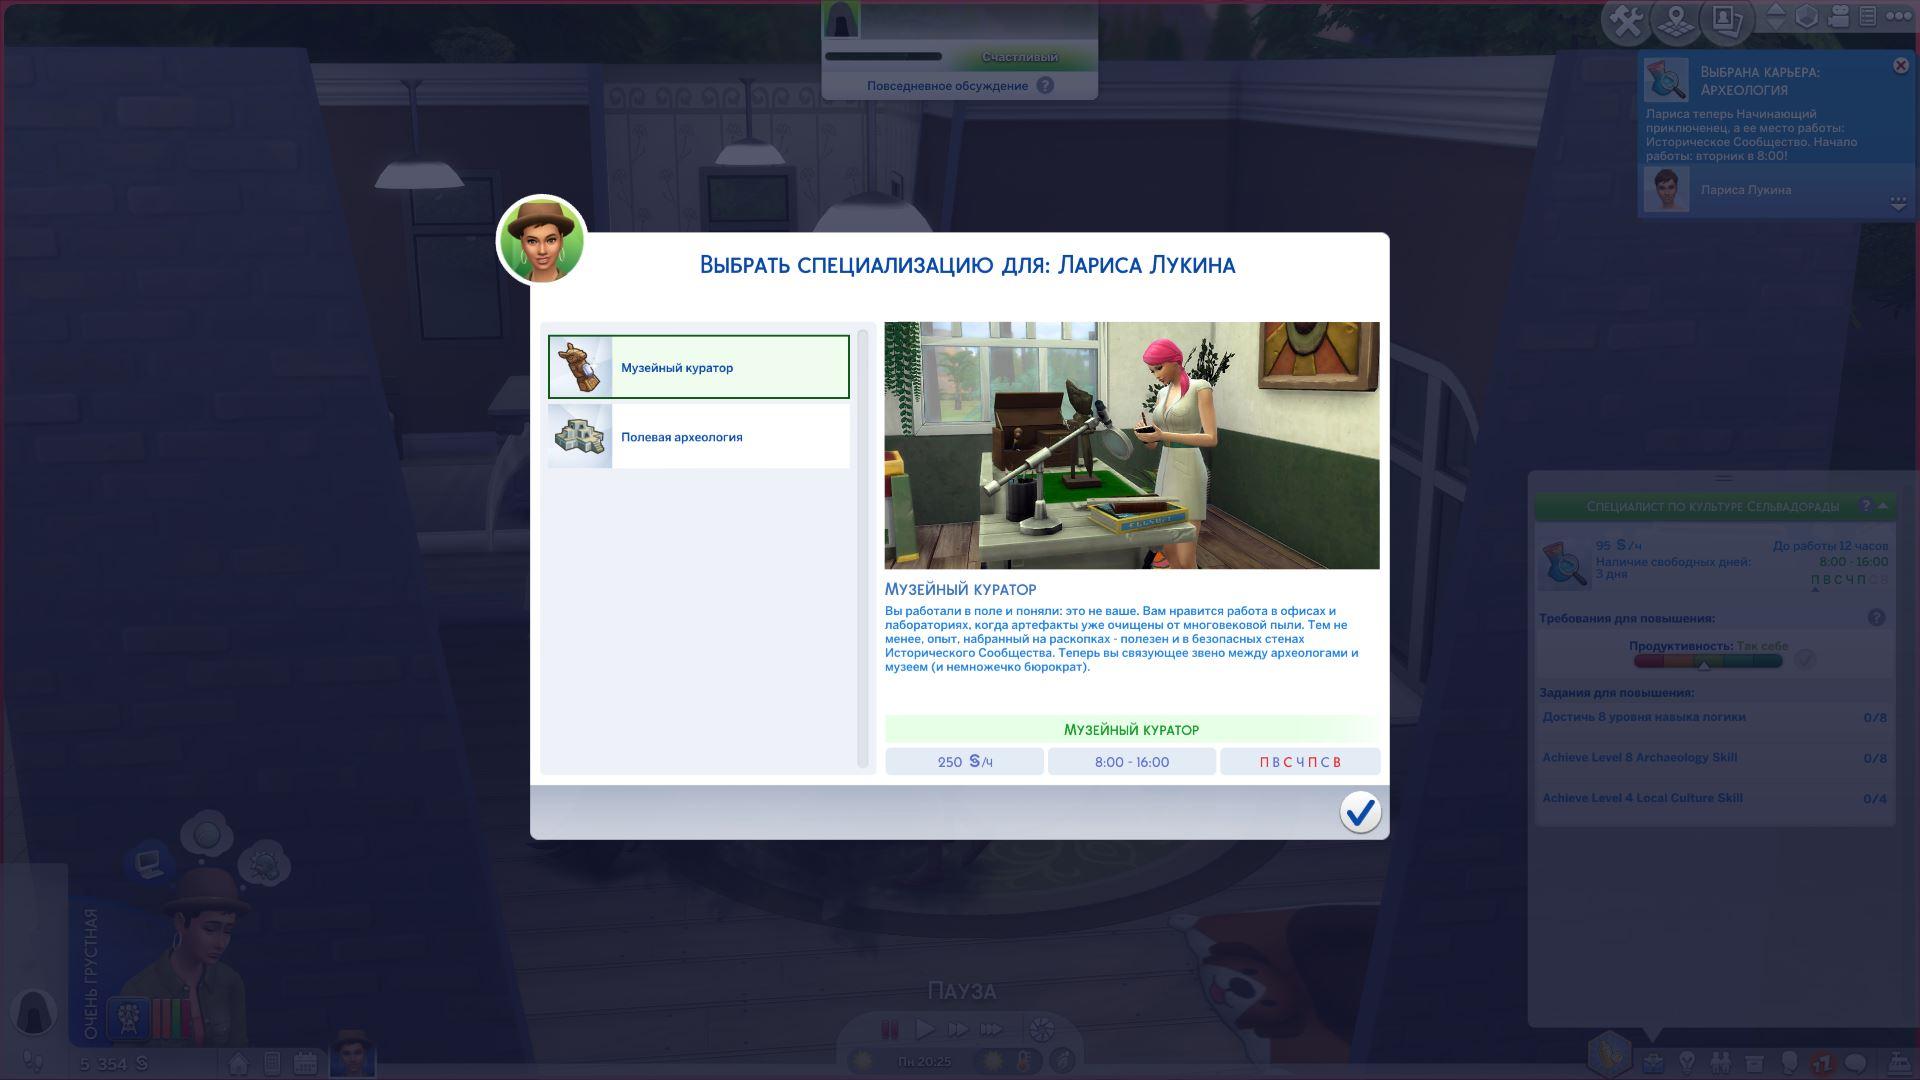 Whickedwhims русский. Вуху (wickedwhims). SIMS 4 мод wickedwhims. Мод симс 4 Wicked whims. Сборка анимация для wickedwhims.